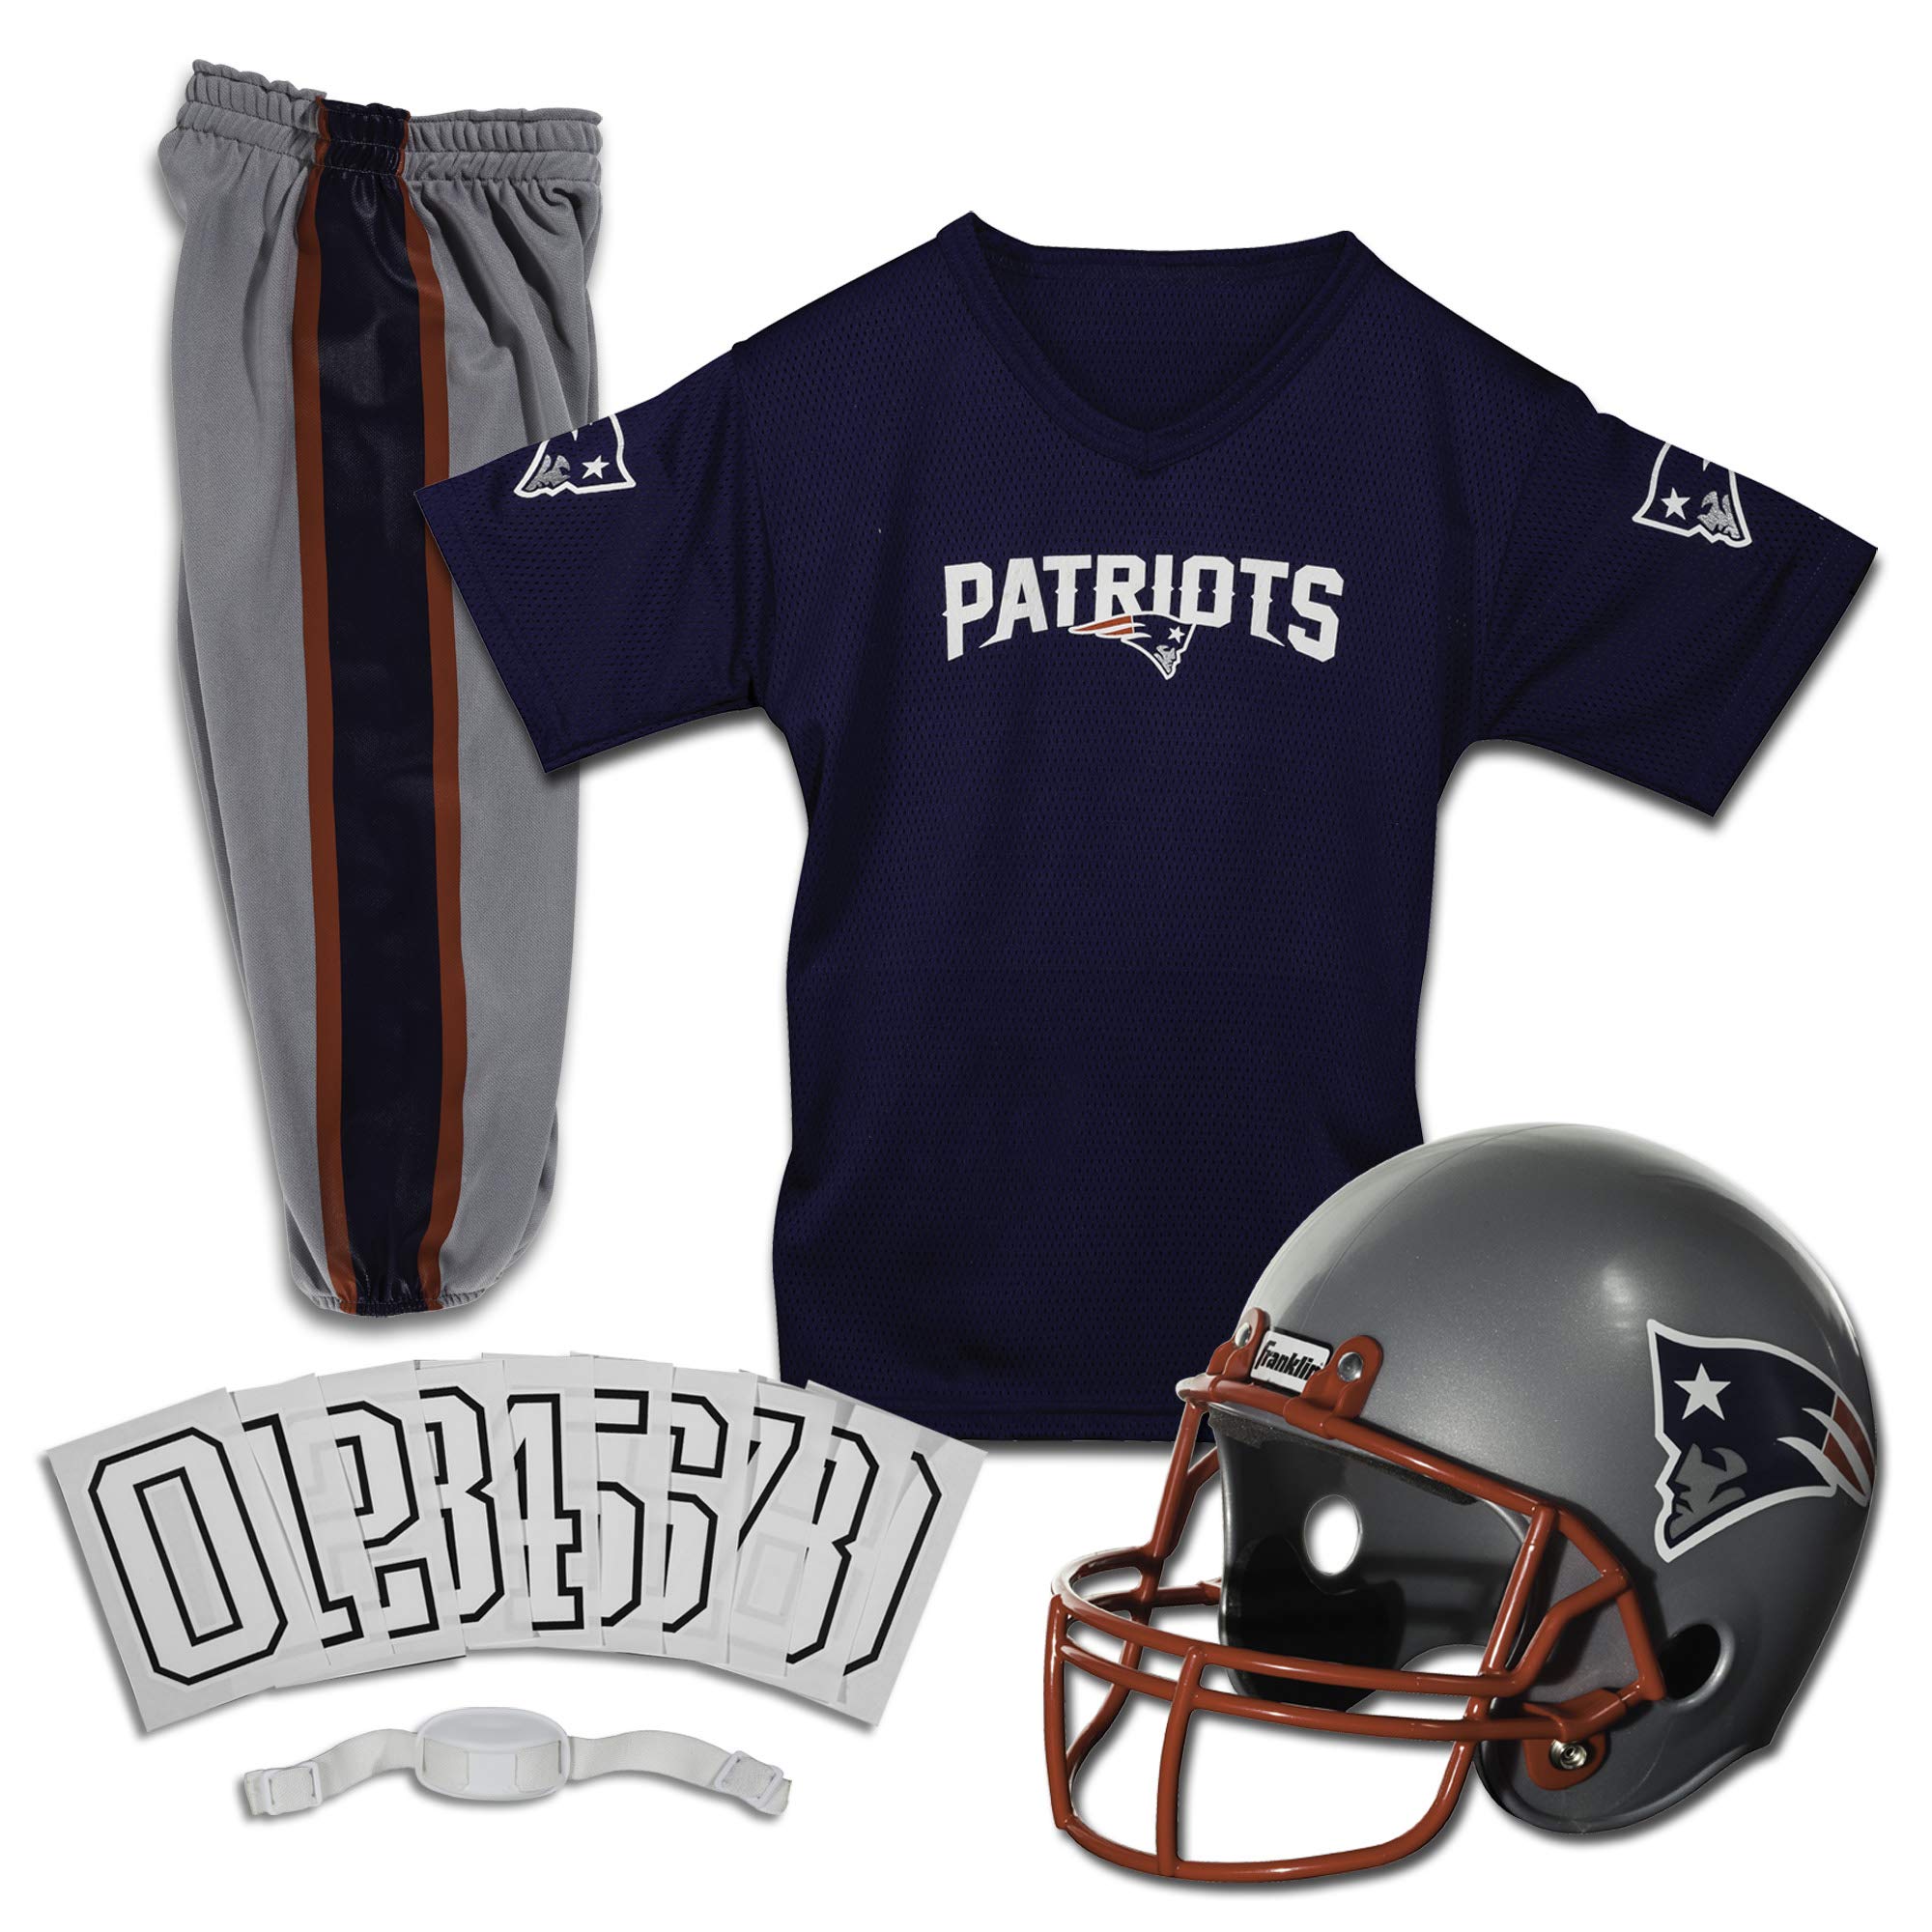 Franklin Sports NFL Kids Football Uniform Set - NFL Youth Football Costume for Boys & Girls - Set Includes Helmet, Jersey & Pants with Chinstrap + Numbers